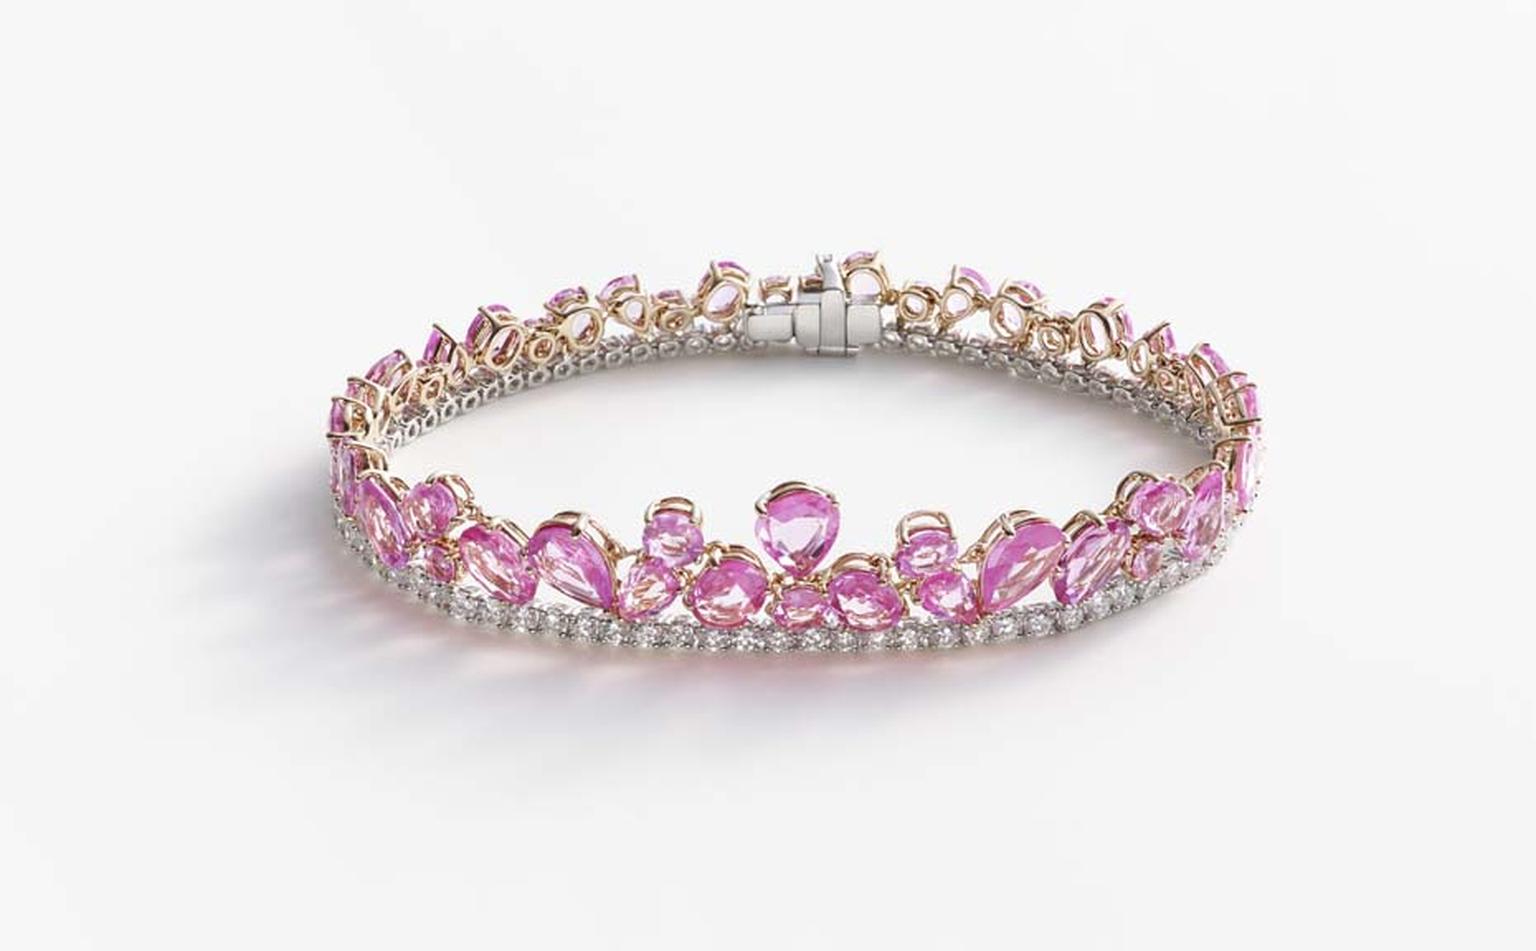 William & Son celebrates pink sapphires in its new Beneath the Rose high jewellery collection. Pink sapphire bracelet with diamonds in white and rose gold.